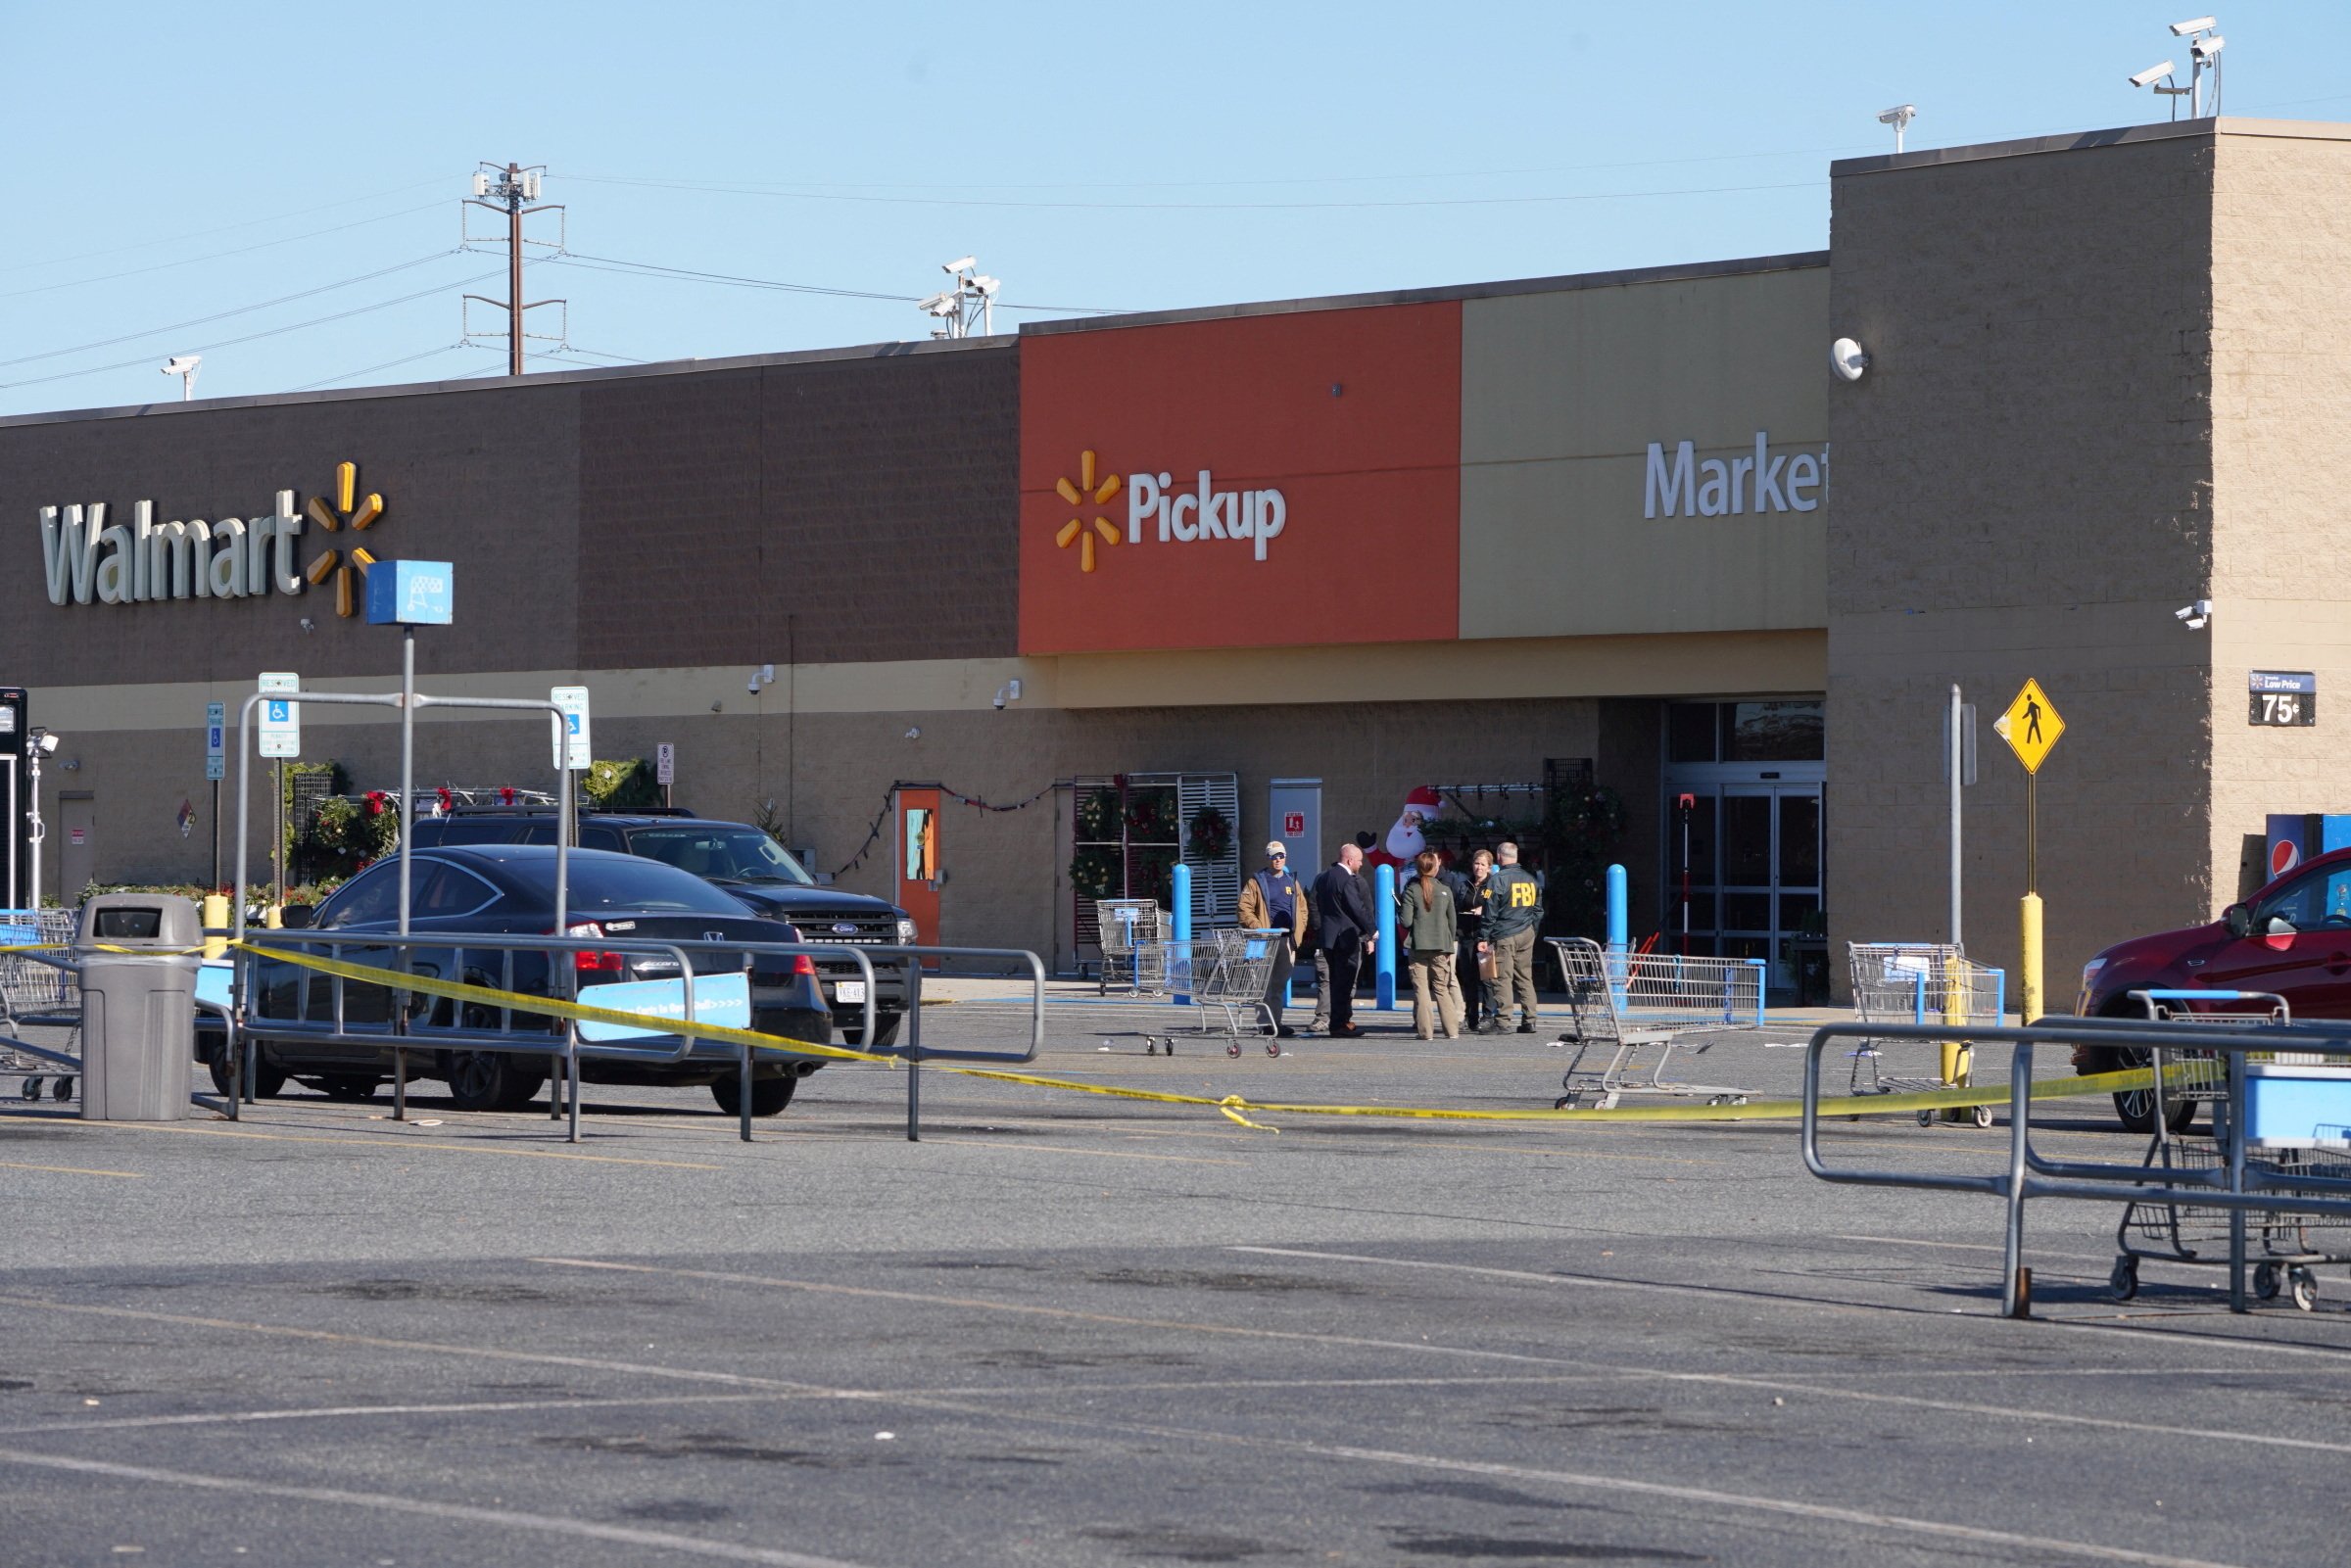 Aftermath of a mass shooting at a Walmart in Chesapeake